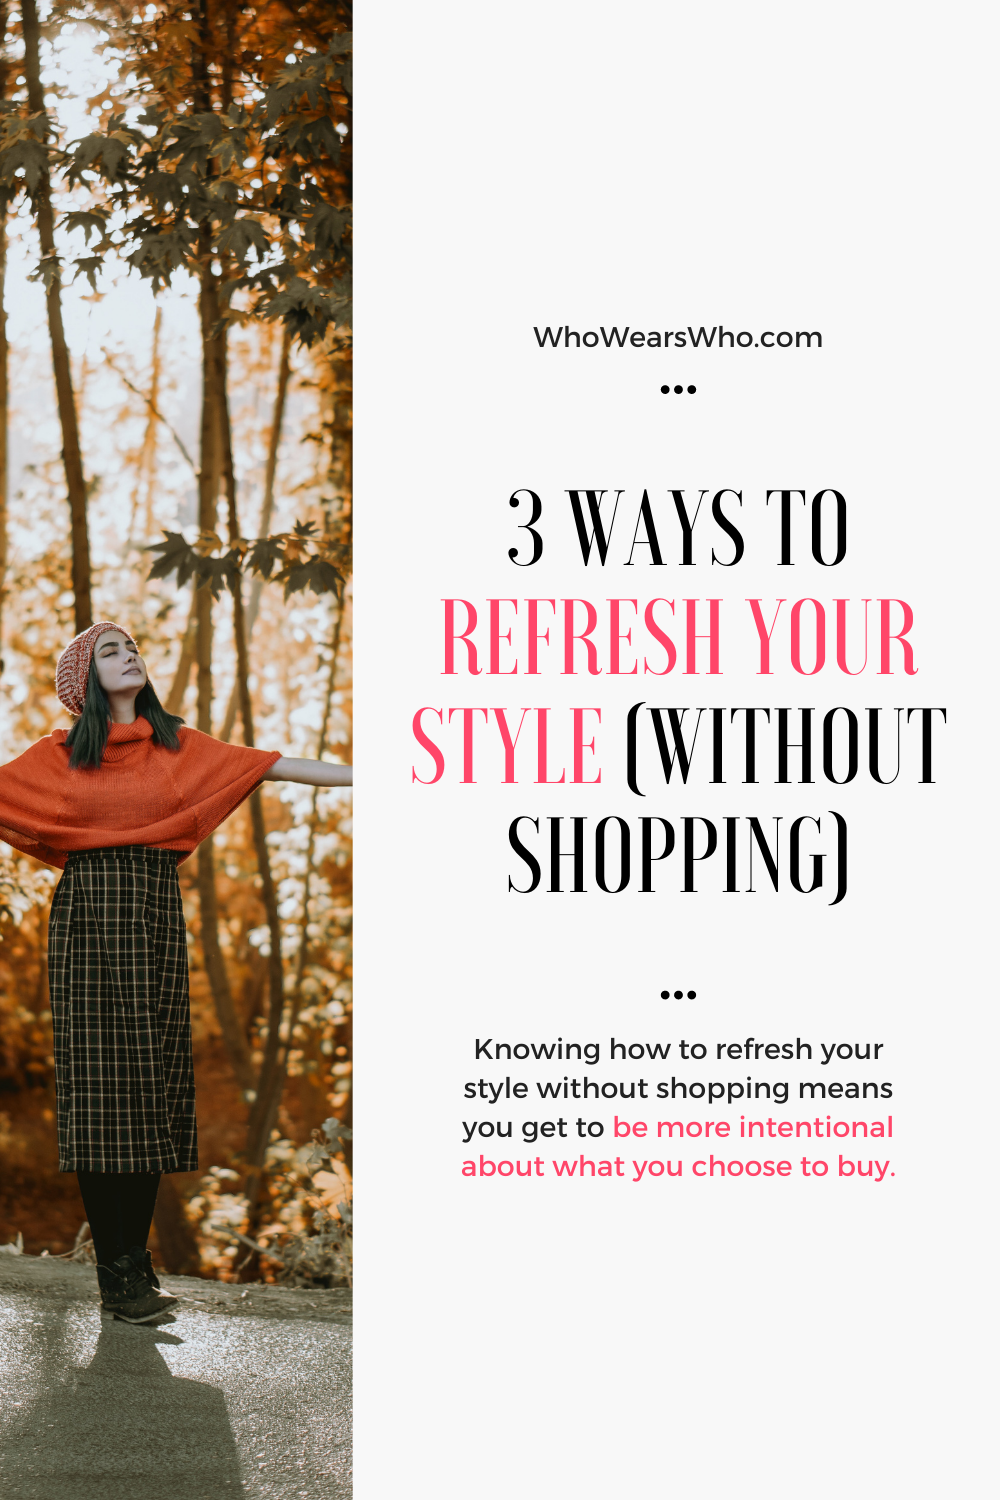 3 Ways to Refresh Your Style without Shopping